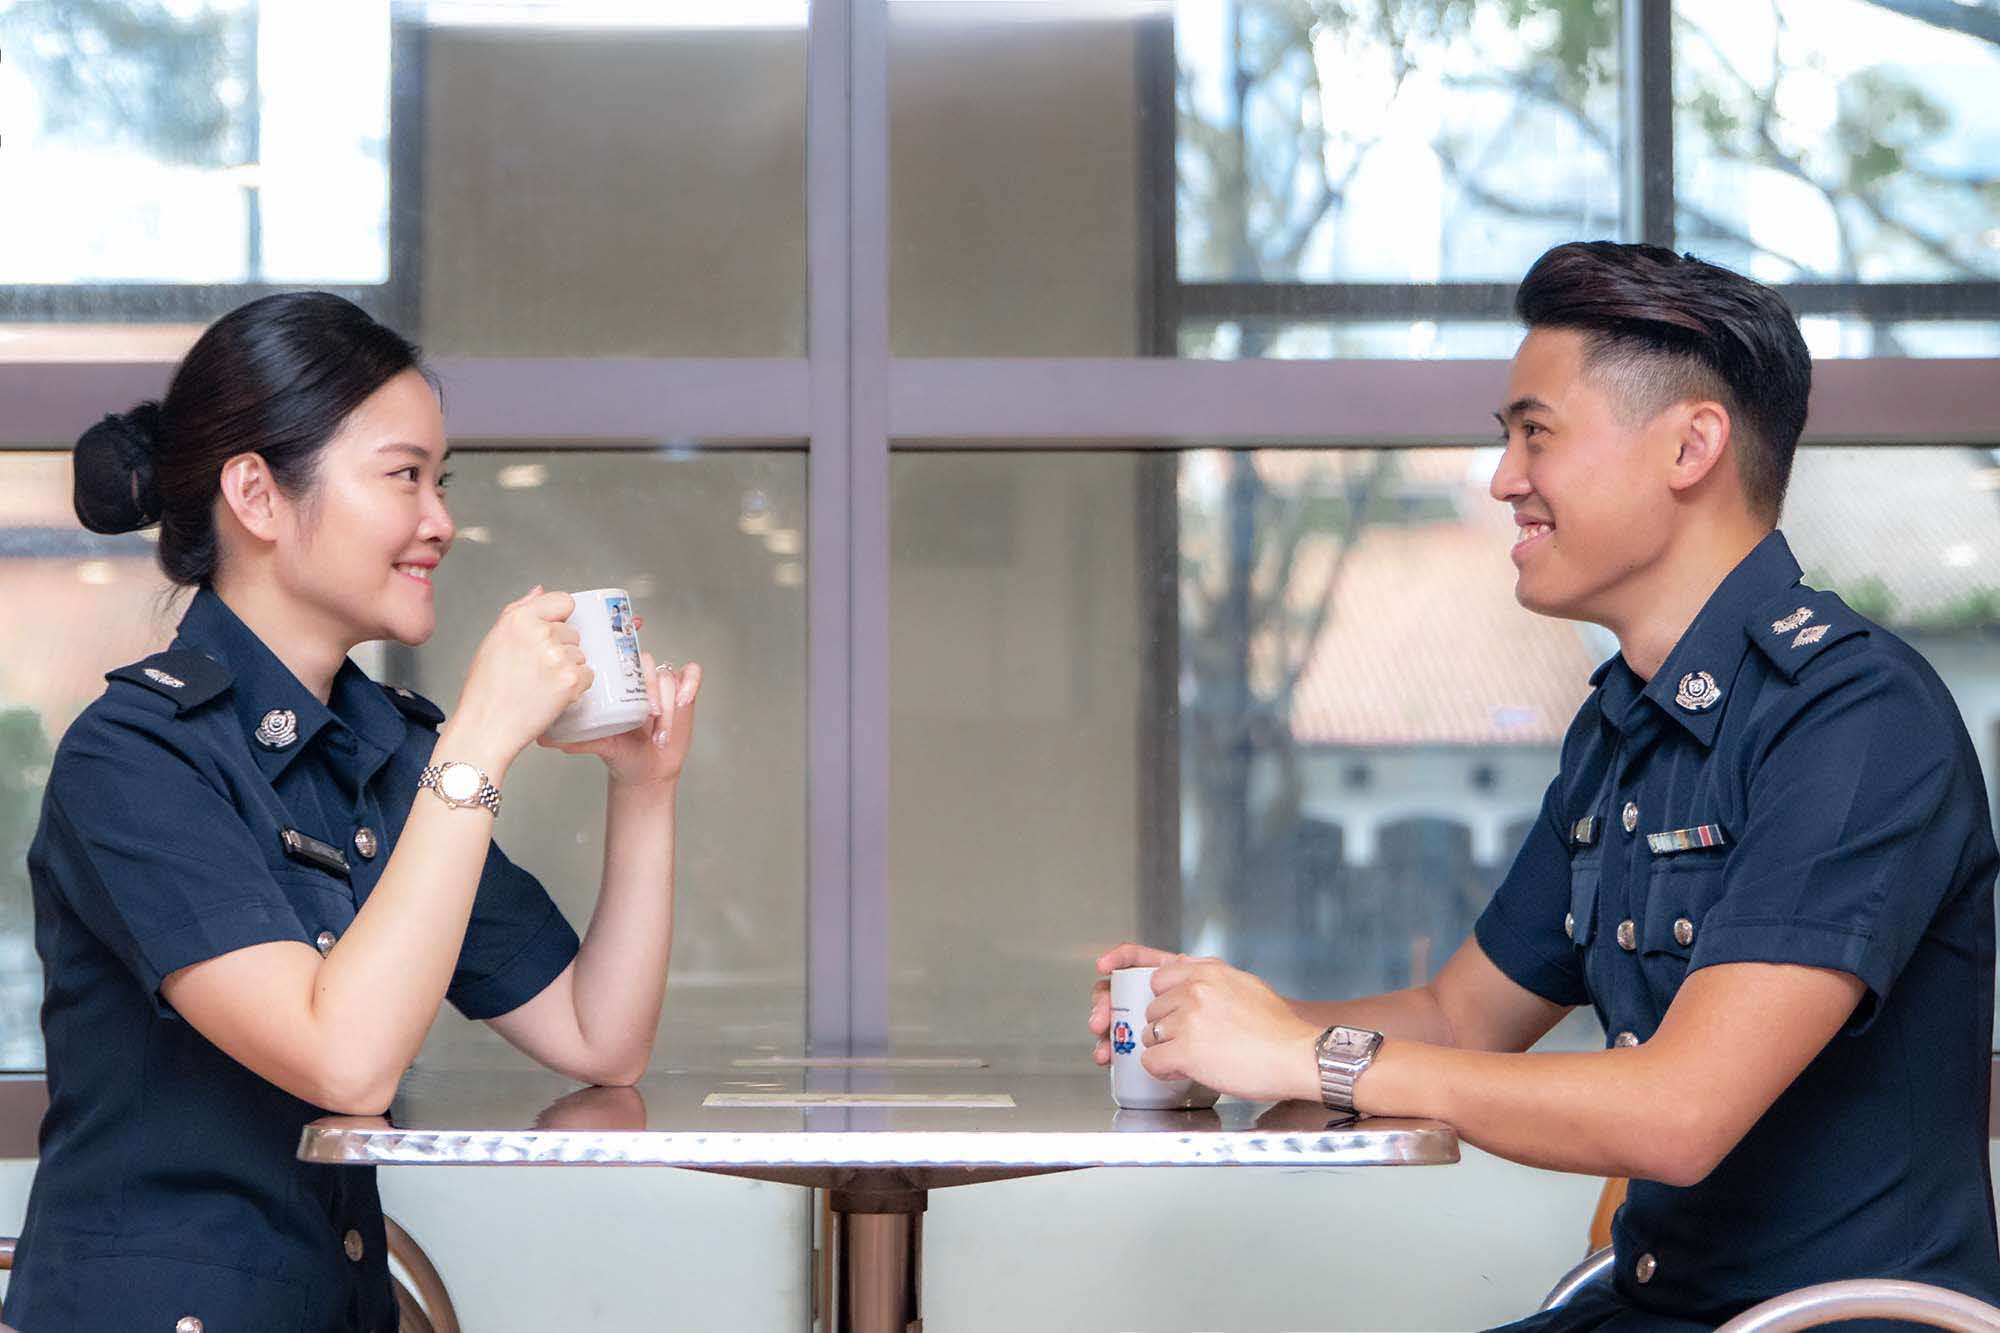 two officers chatting and drinking coffee at cafeteria